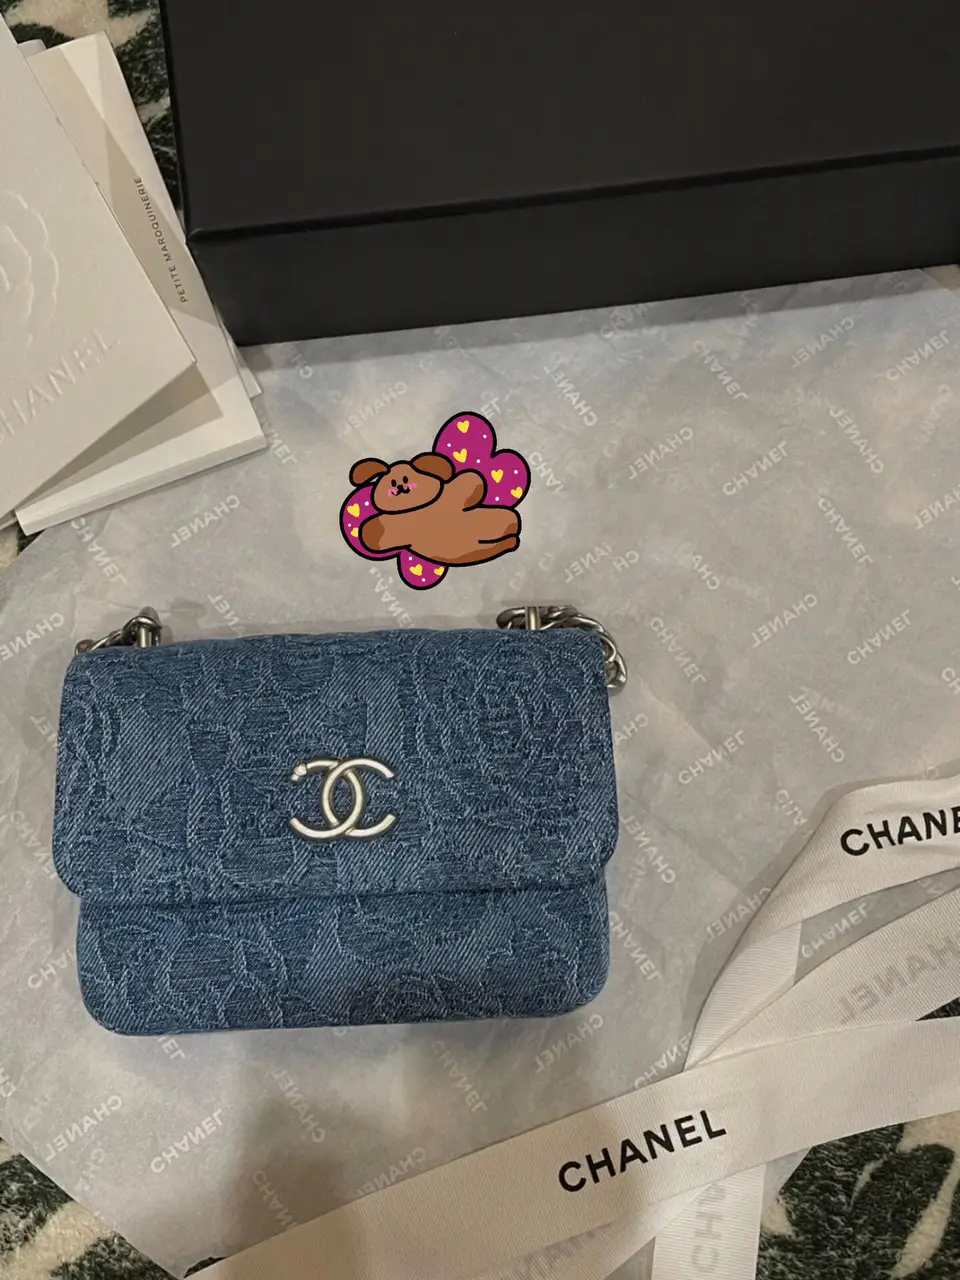 Vintage Vibes w/ Chanel's Blue Denim Bag👌, Gallery posted by Jenny Cheung